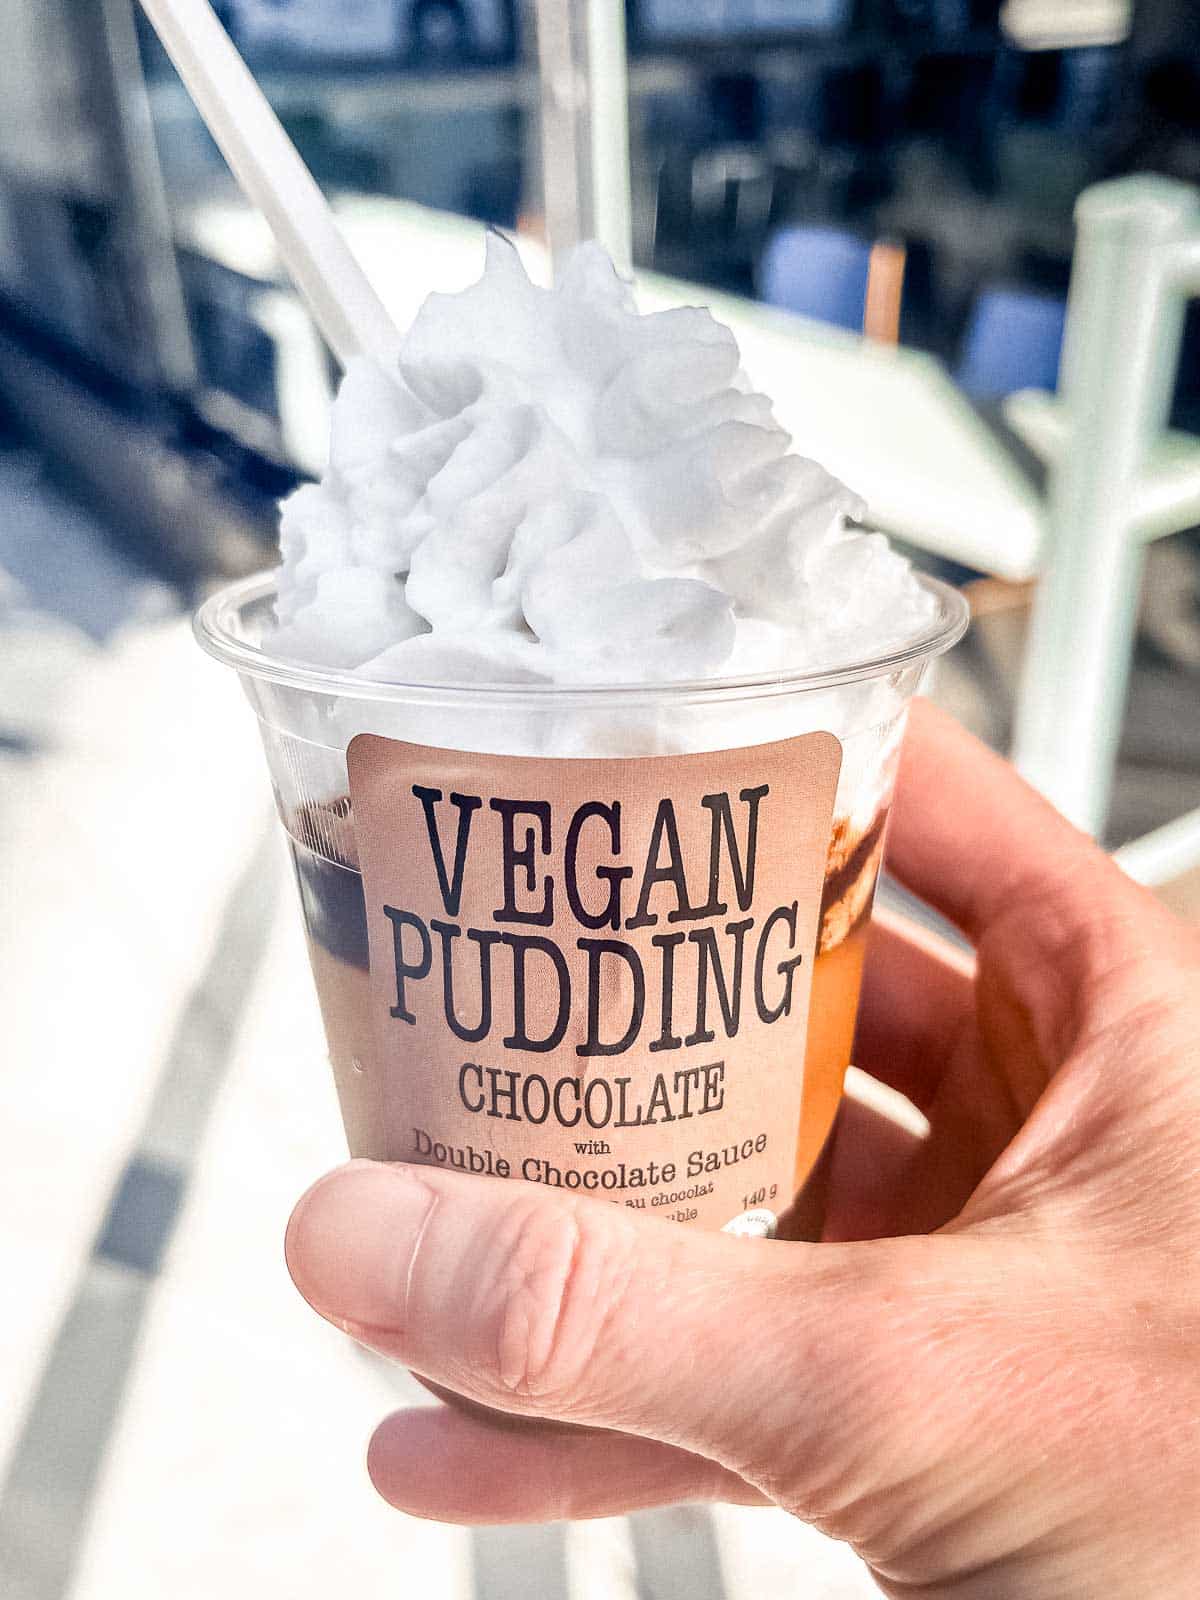 Pudding with coconut whipped cream from Vegan Pudding & Co